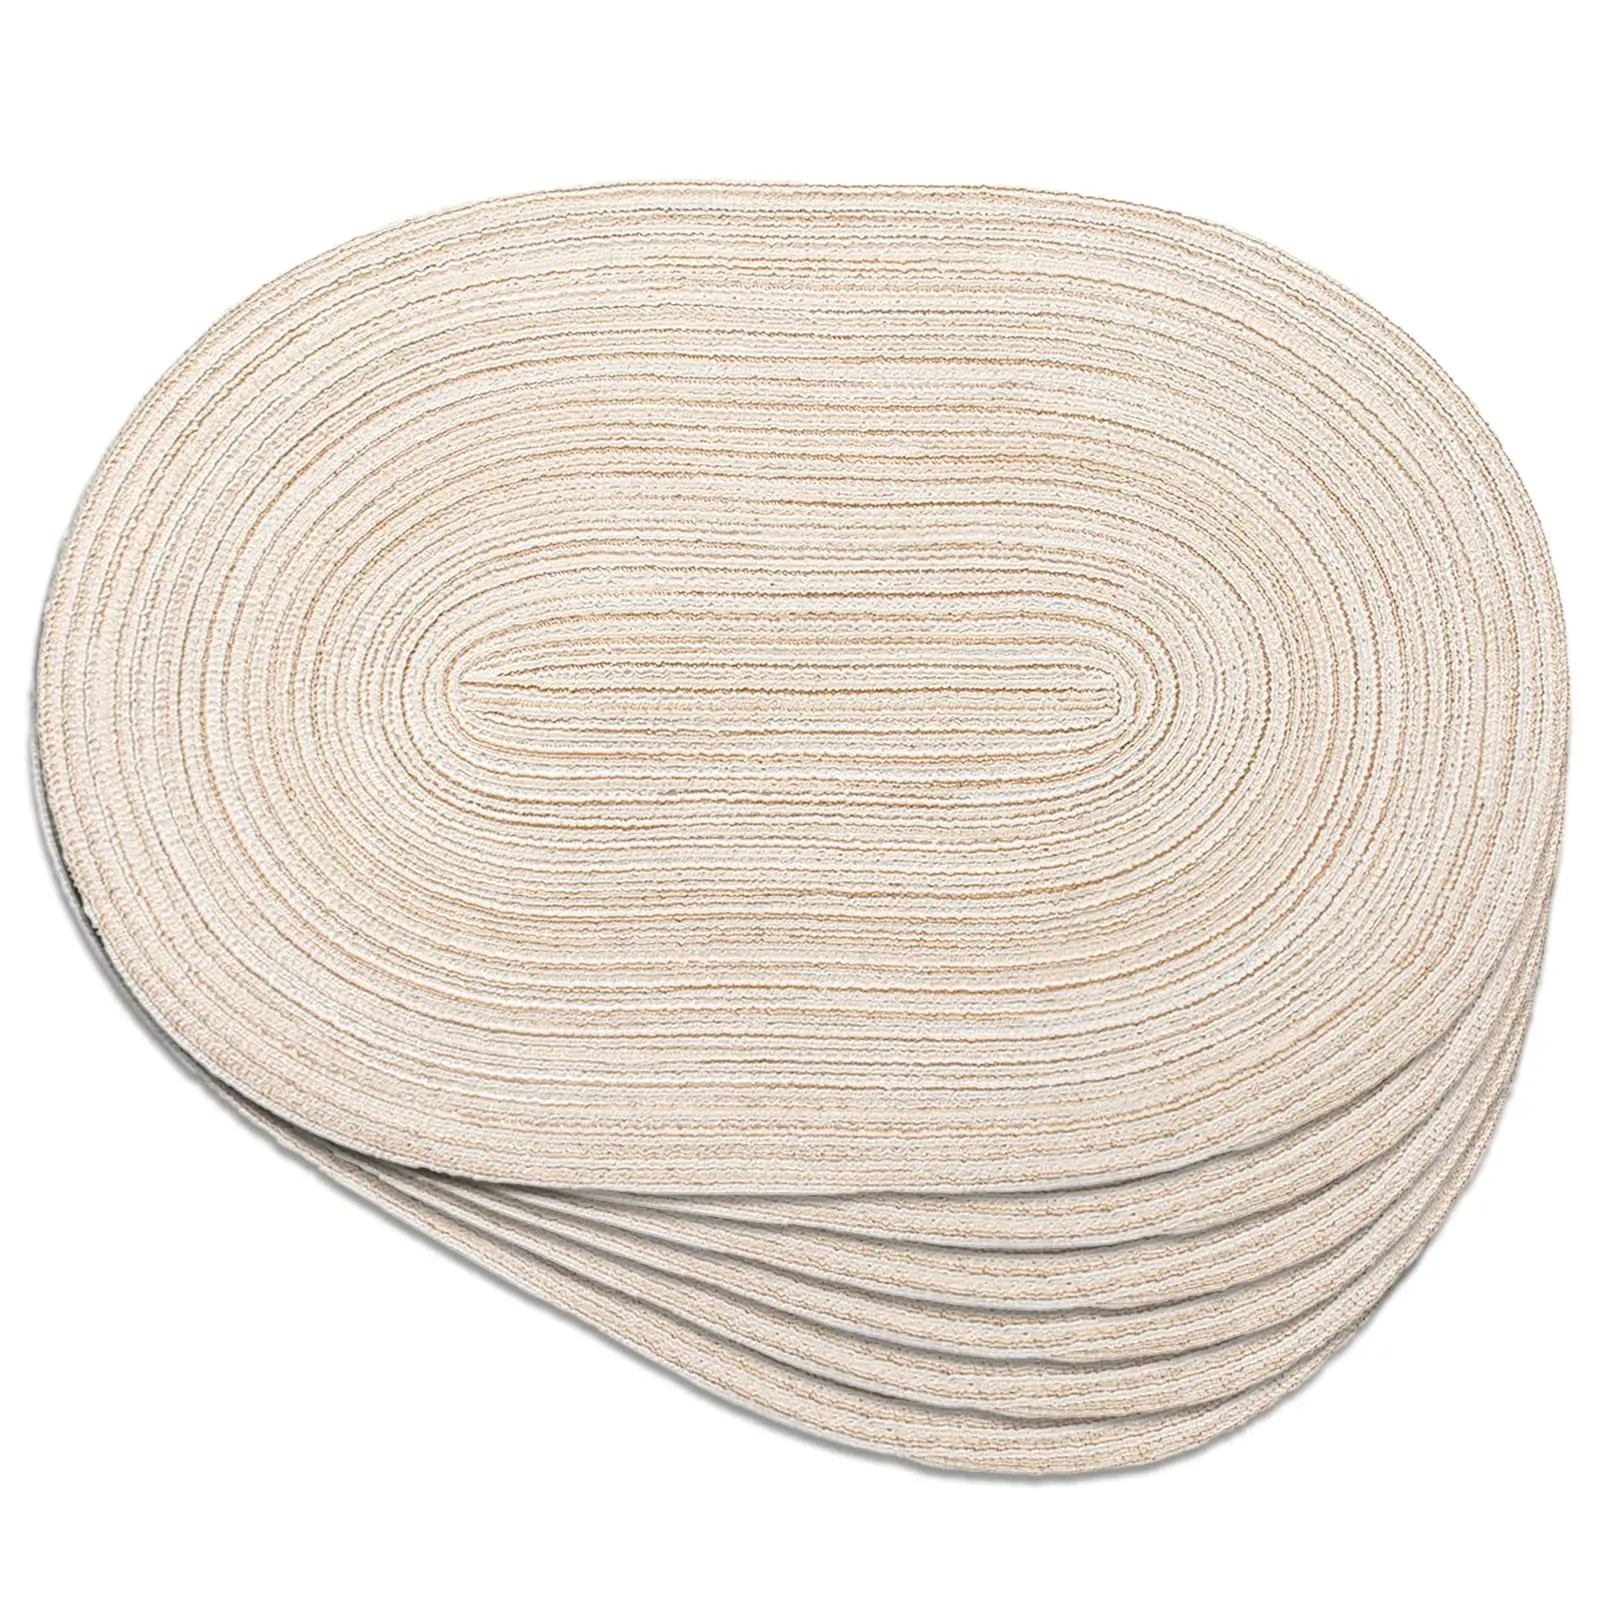 

Oval Braided Placemats 14x20 Inch Table Mats Set of 6 for Dining Tables Natural Woven Heat Resistant Place Mats